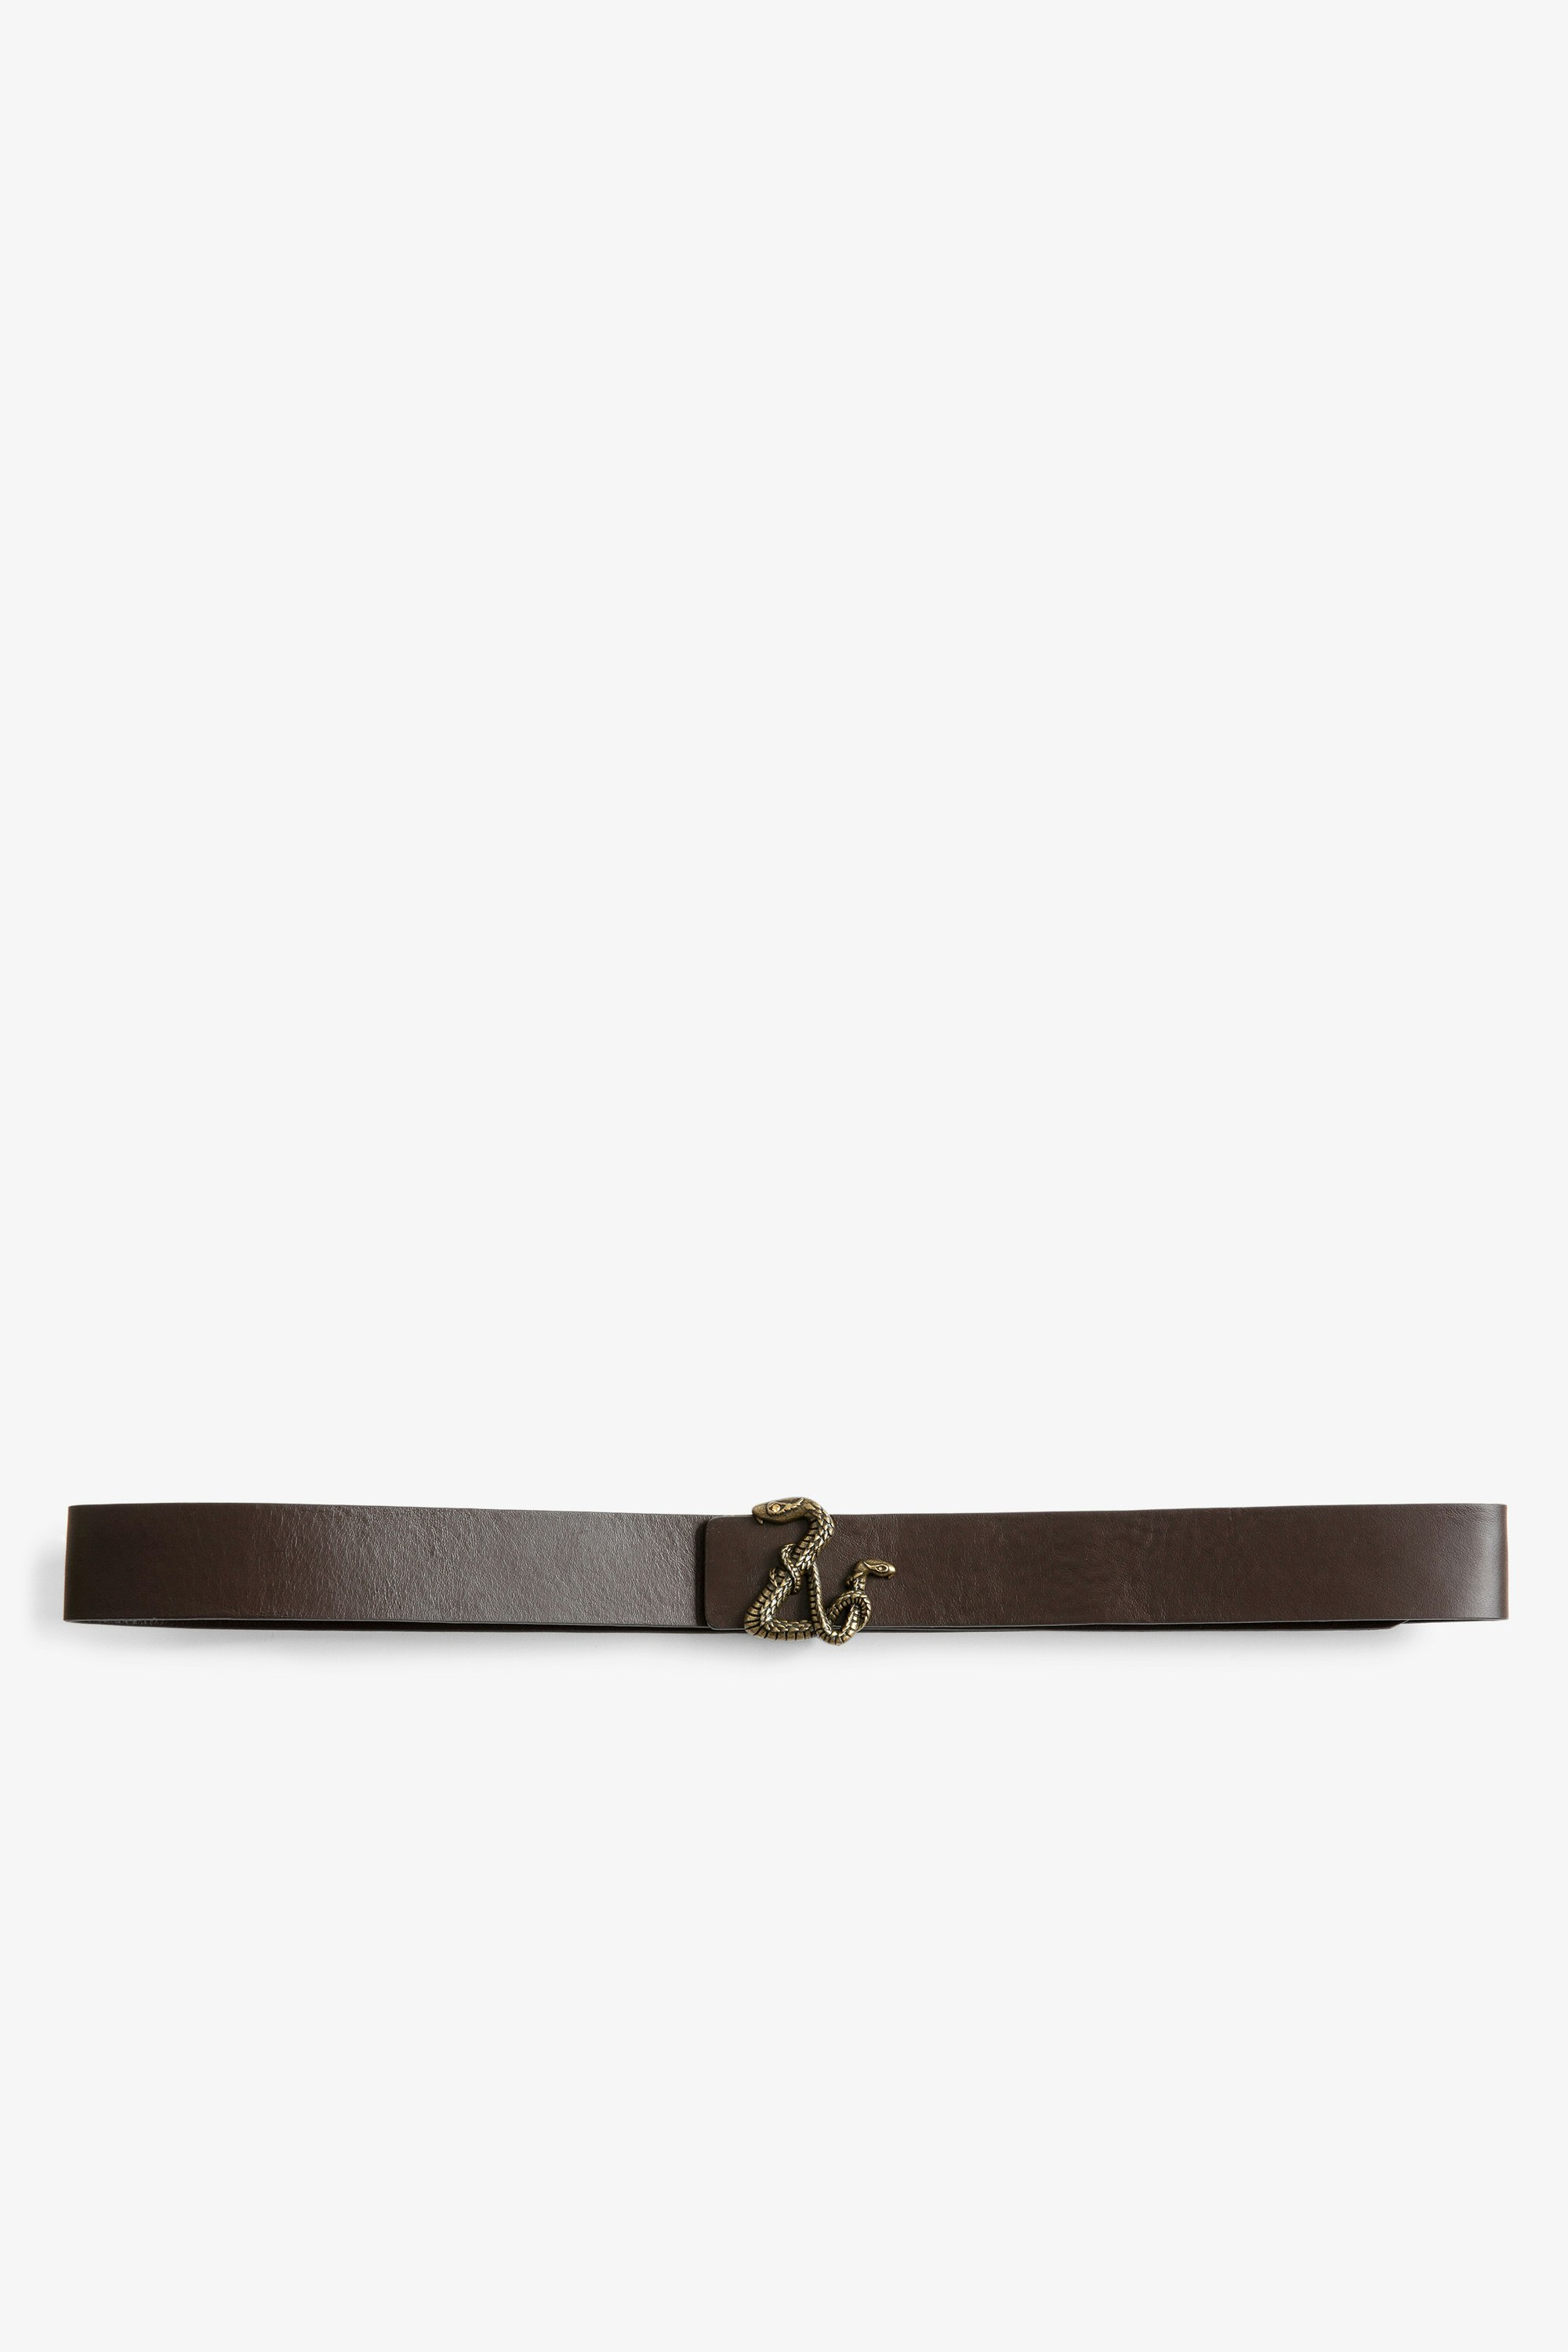 ZV Initiale Snake ベルト Women's brown leather belt with ZV buckle